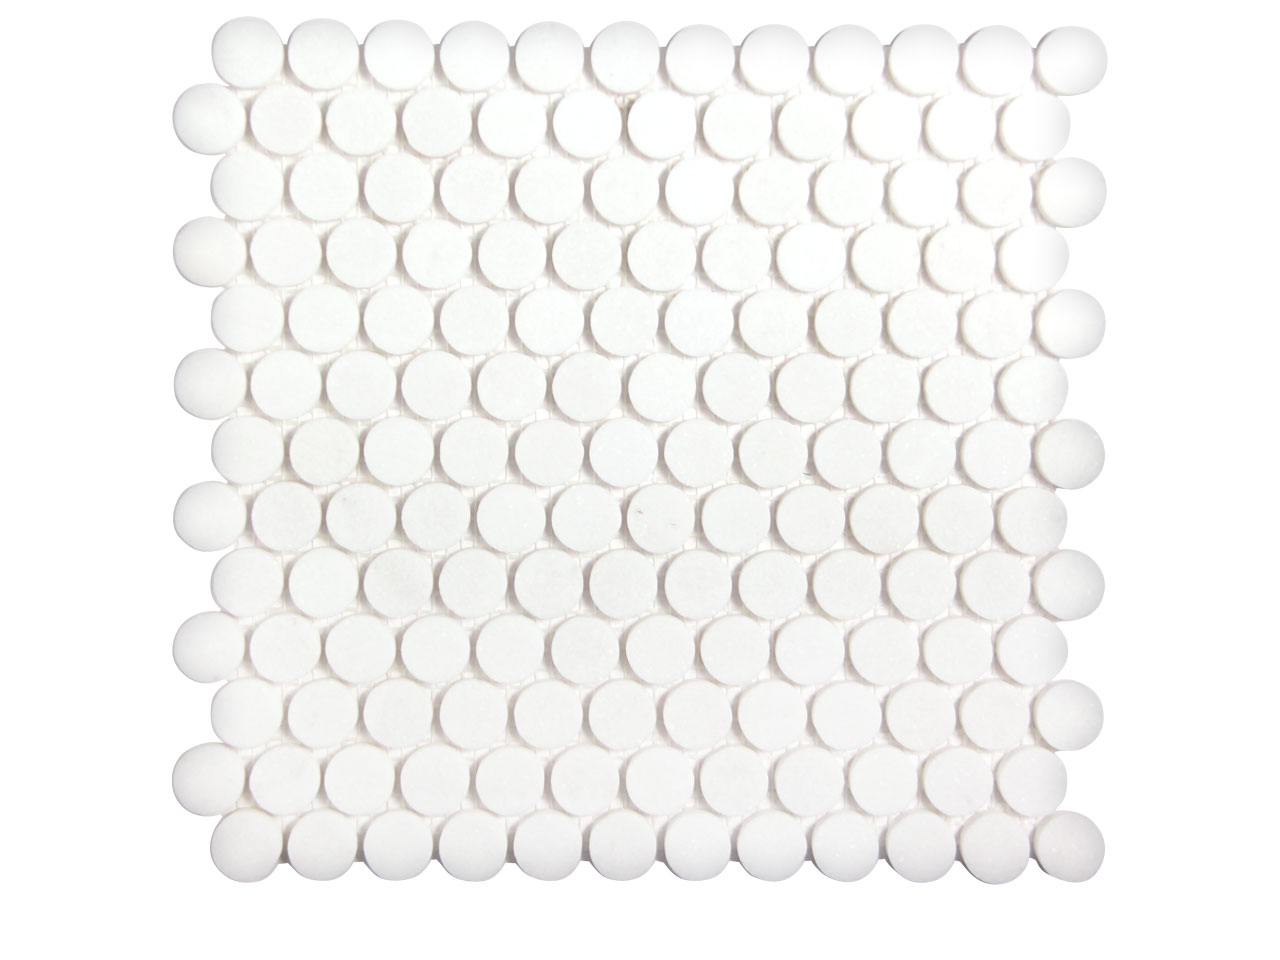 Penny Round Thassos White Honed Mosaic Swatch